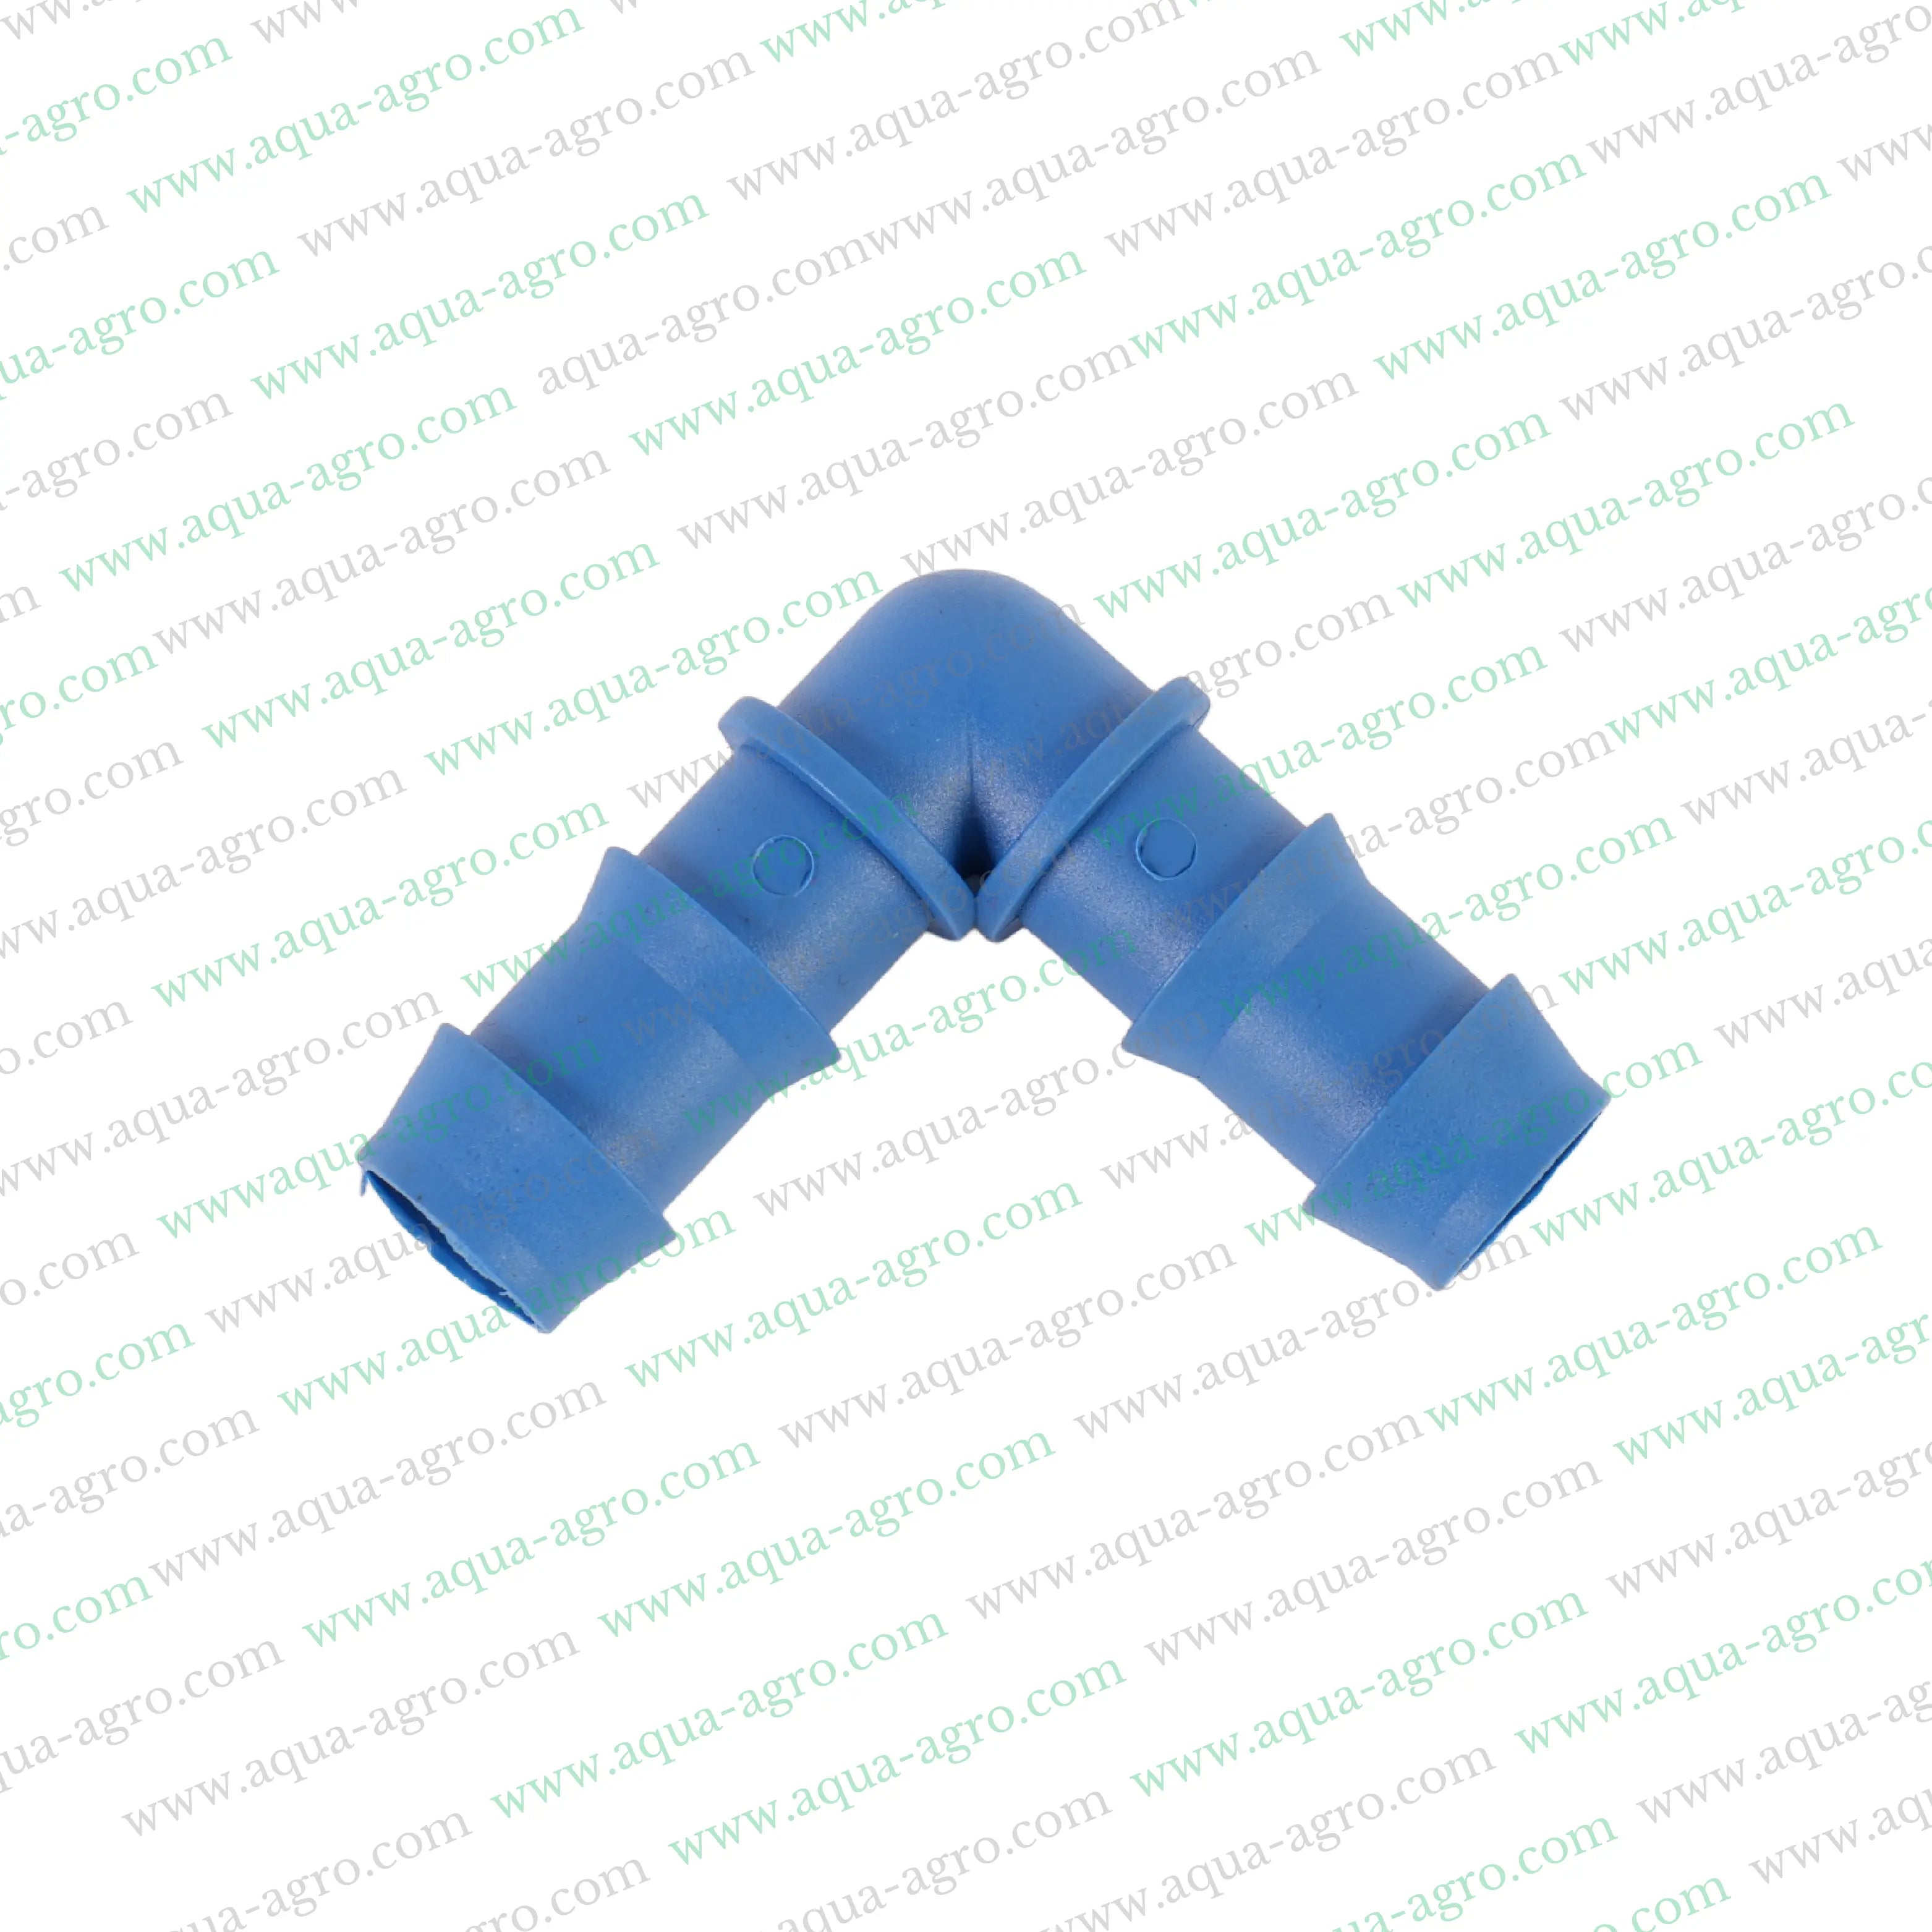 AQUA - AGRO | Drip Fittings And Accessories - Barbed Fittings - Lite - Elbow - 16mm